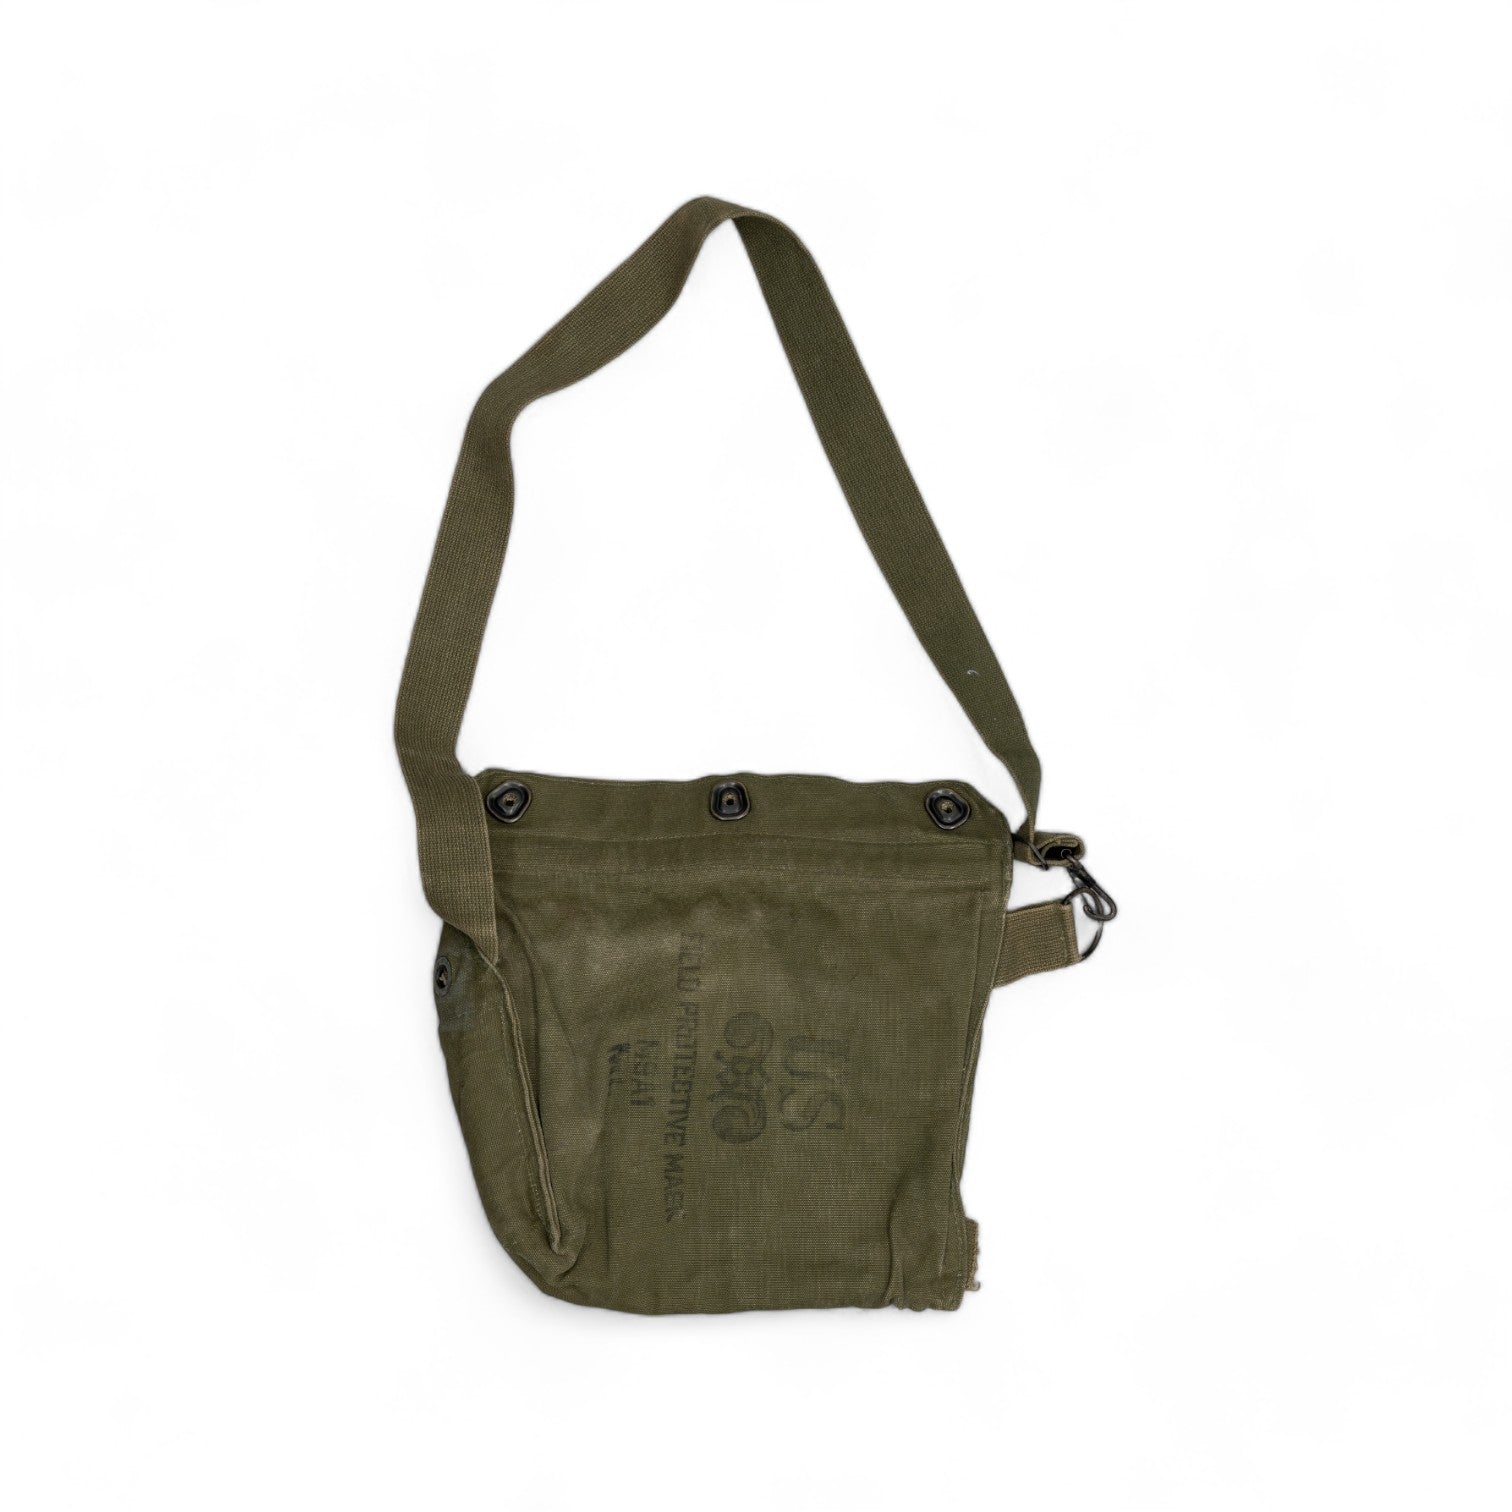 MILITARY FIELD PROTECTIVE MASK SIDE BAG